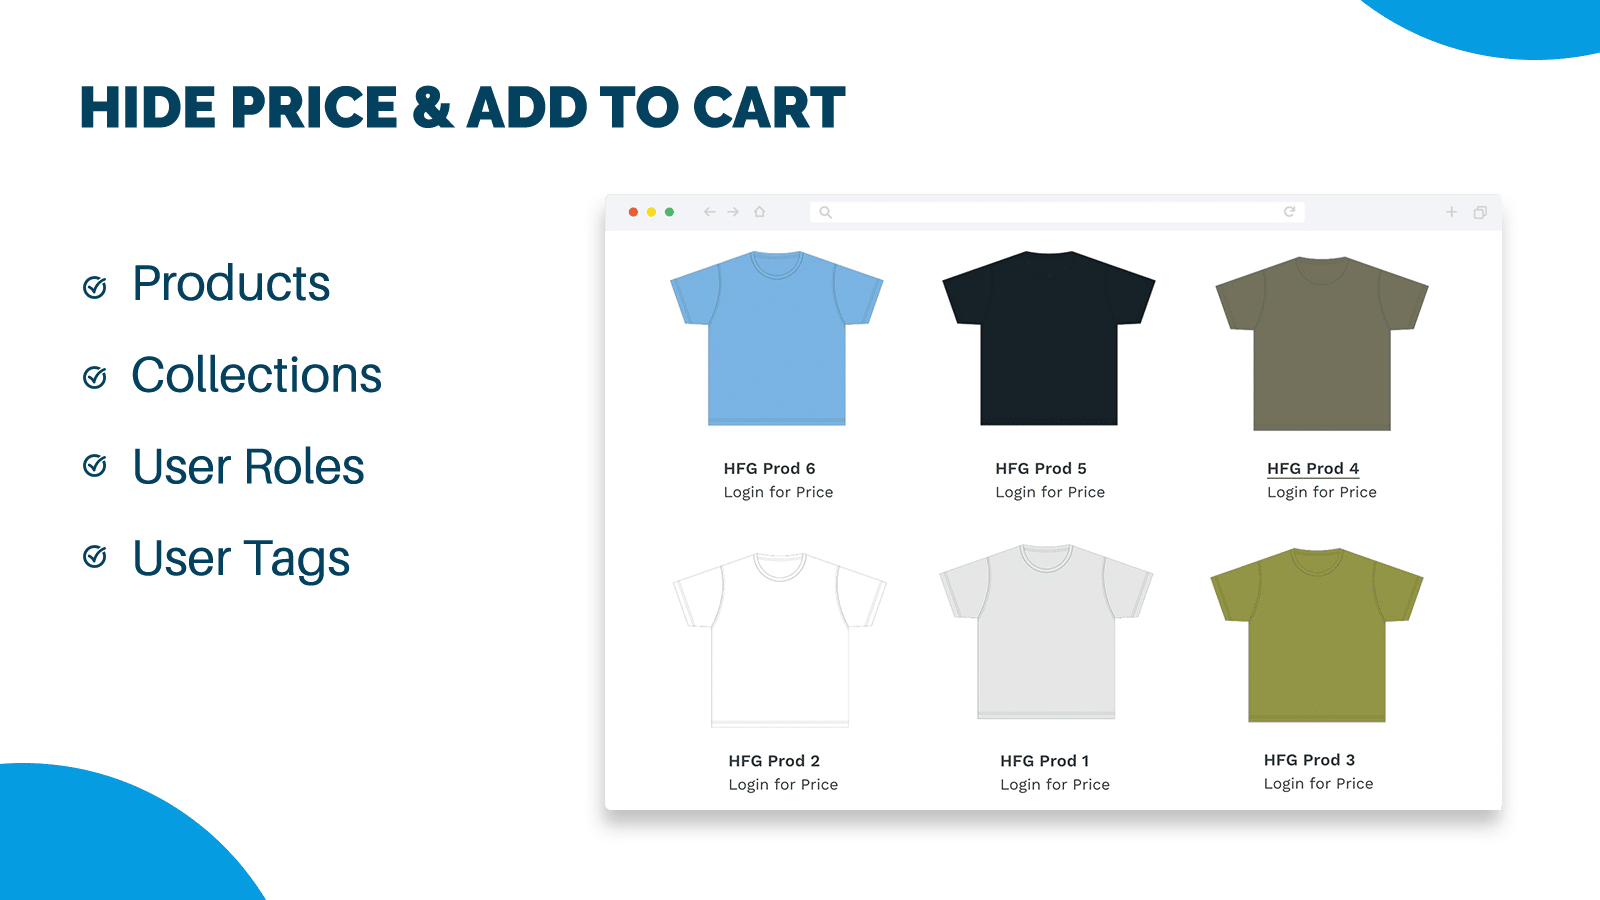 Hide Price & Add to Cart